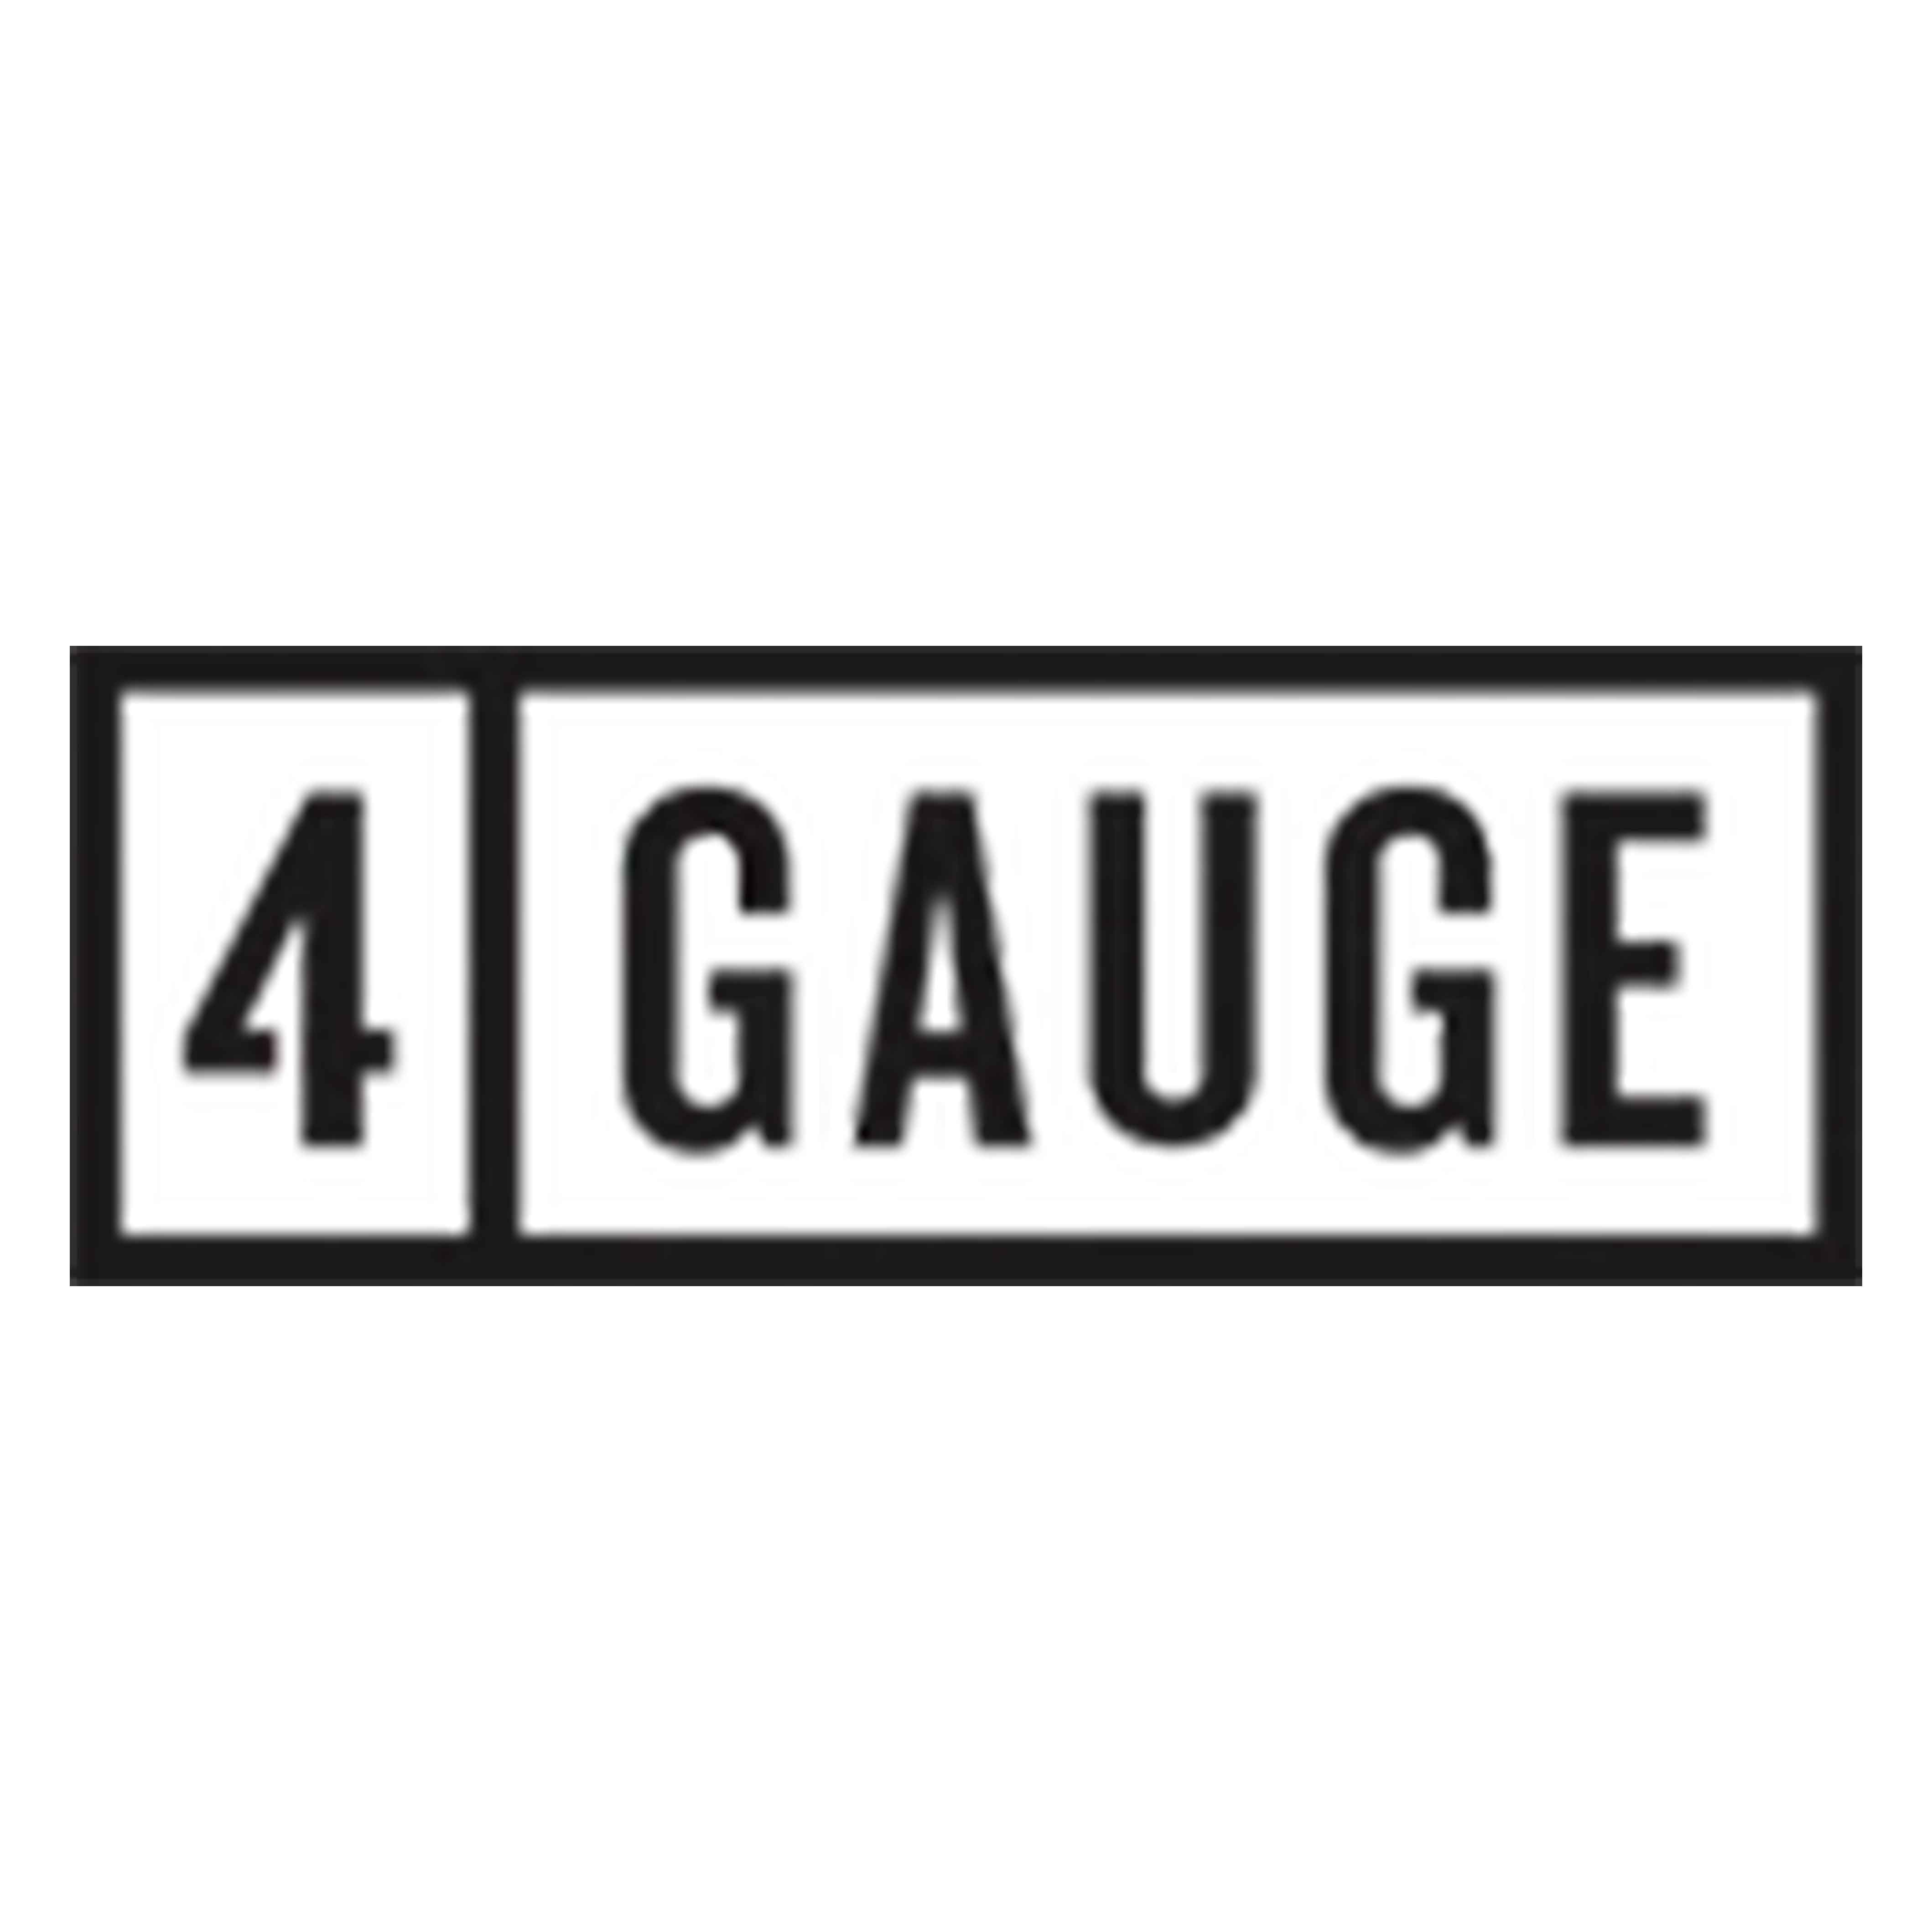 4 Gauge Fitness coupon codes